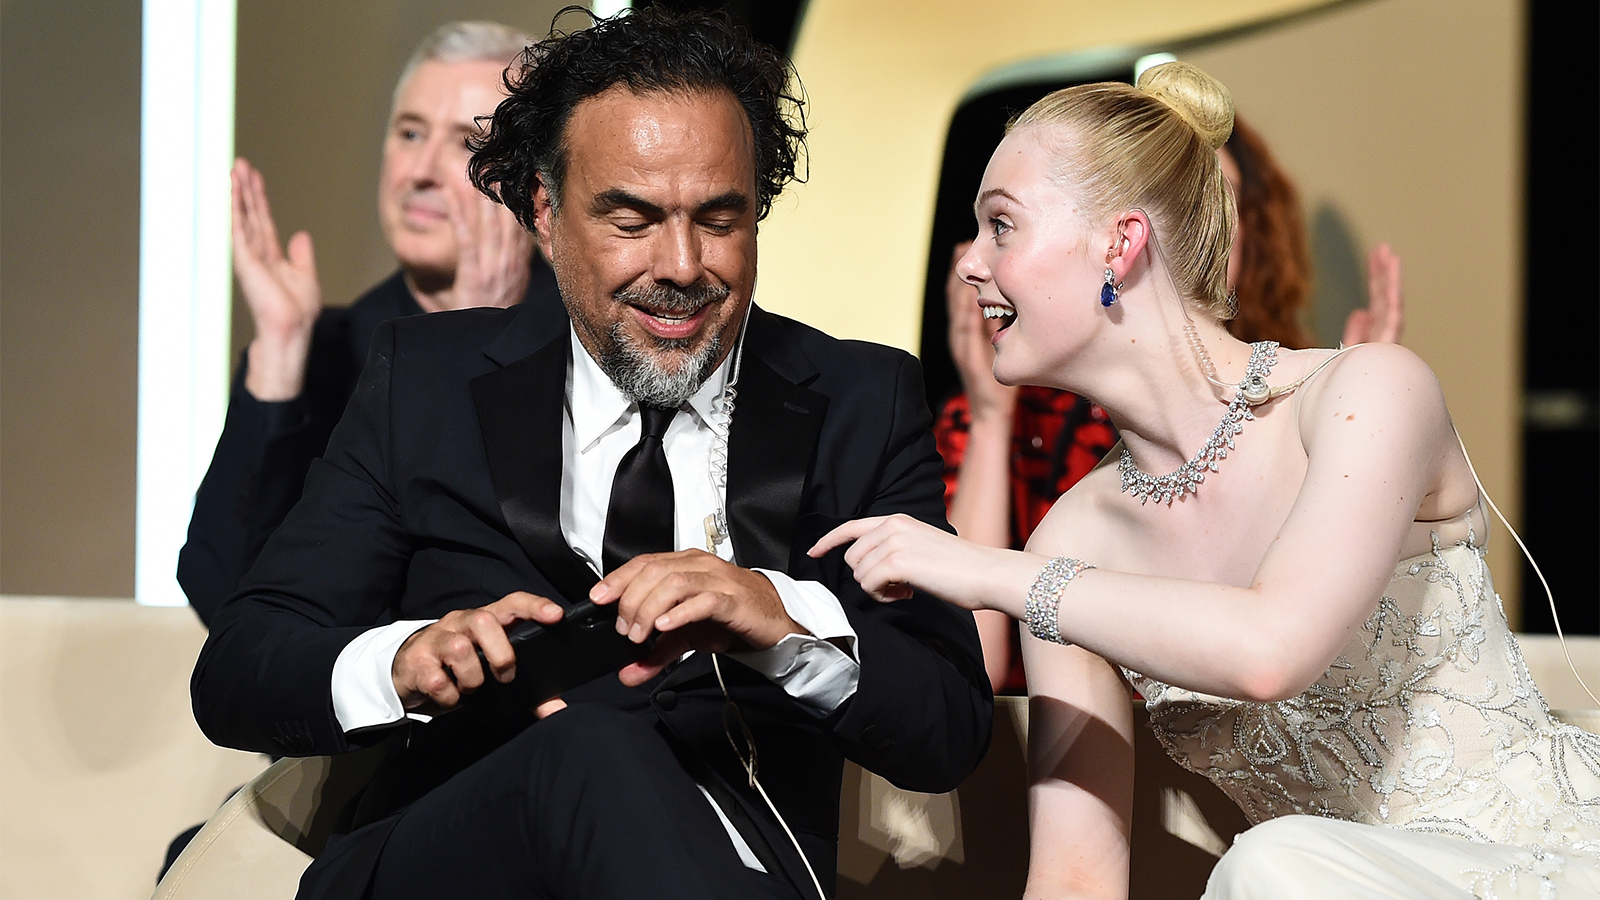 Alejandro G. Iñárritu’s new movie will premiere in theaters plus Netflix by year’s end